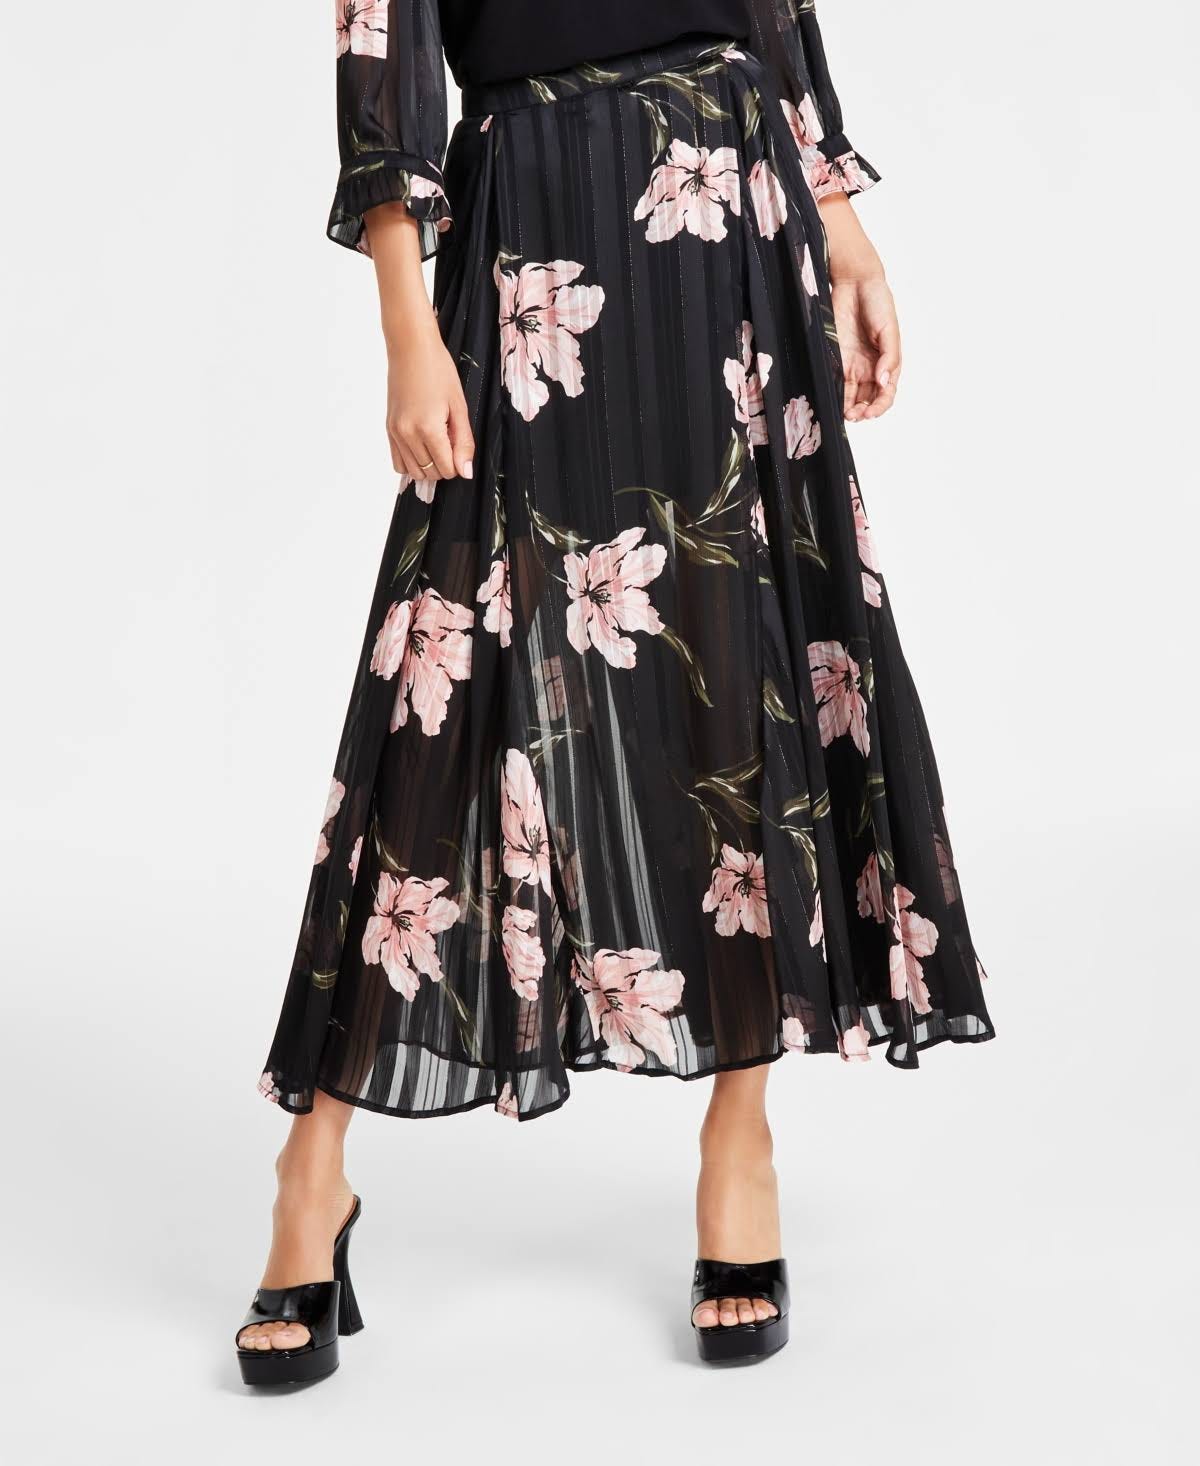 Lined Floral Print Skirt from Cece for a Stylish Look | Image